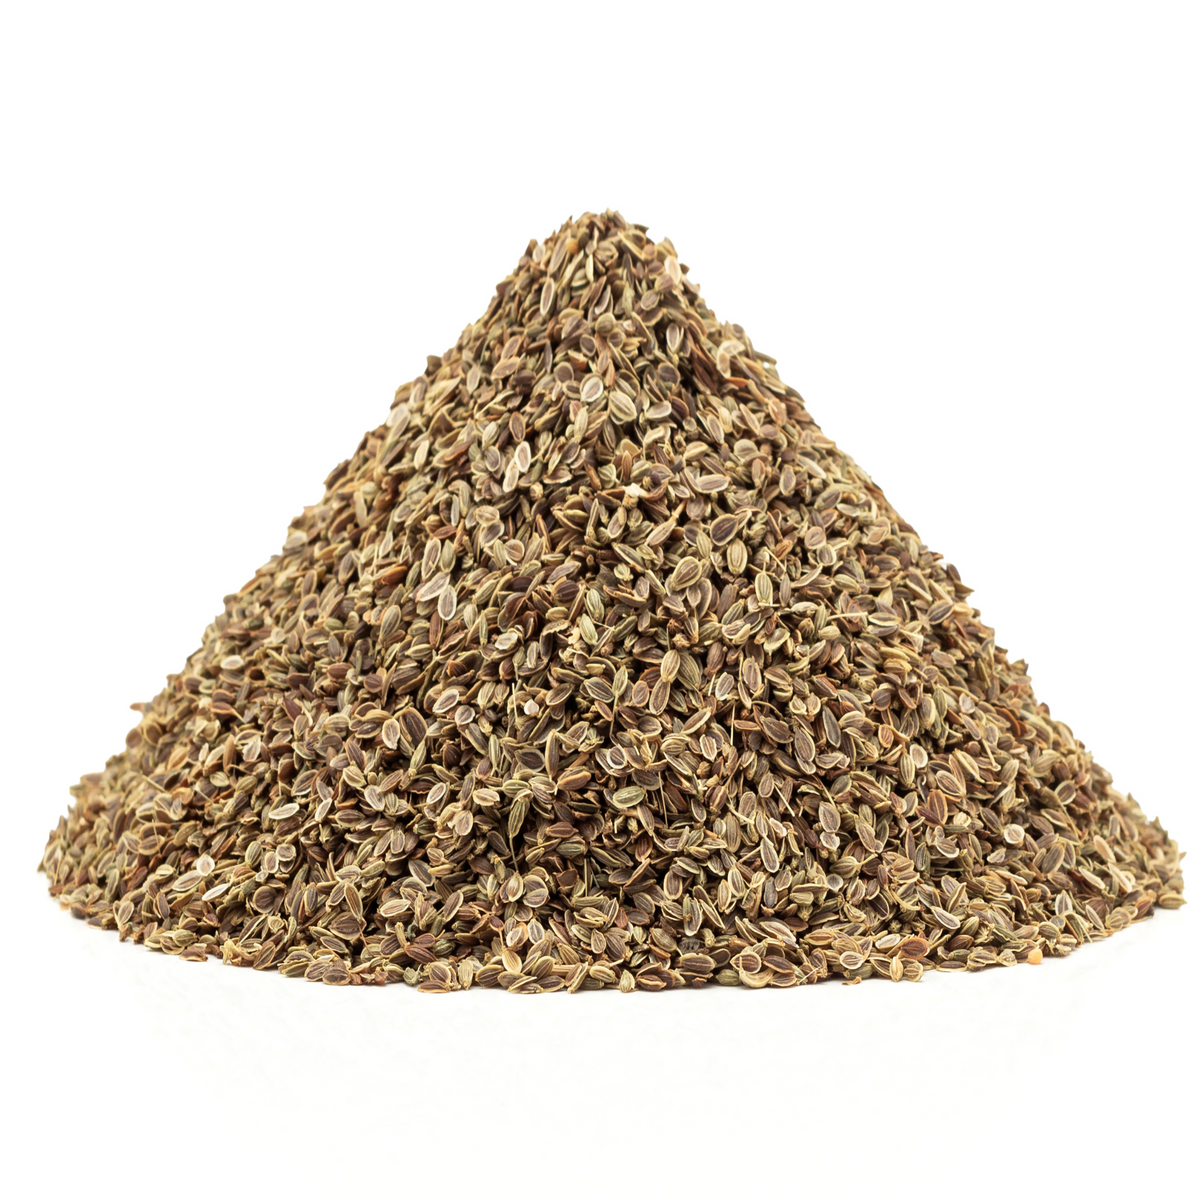 100% Natural Dry Dill Seeds